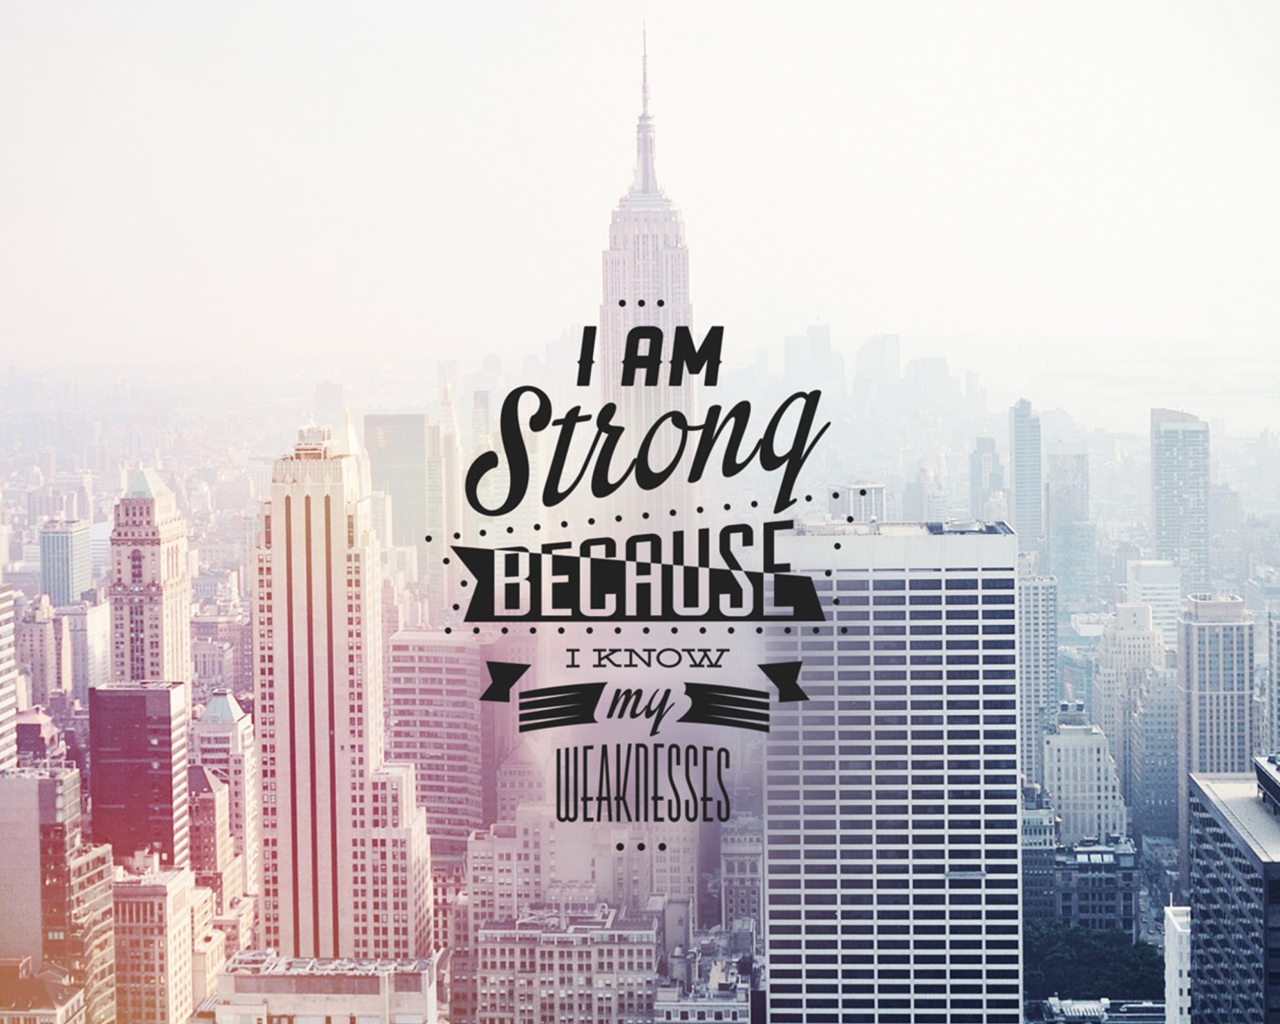 Fondo de pantalla I am strong because i know my weakness 1280x1024